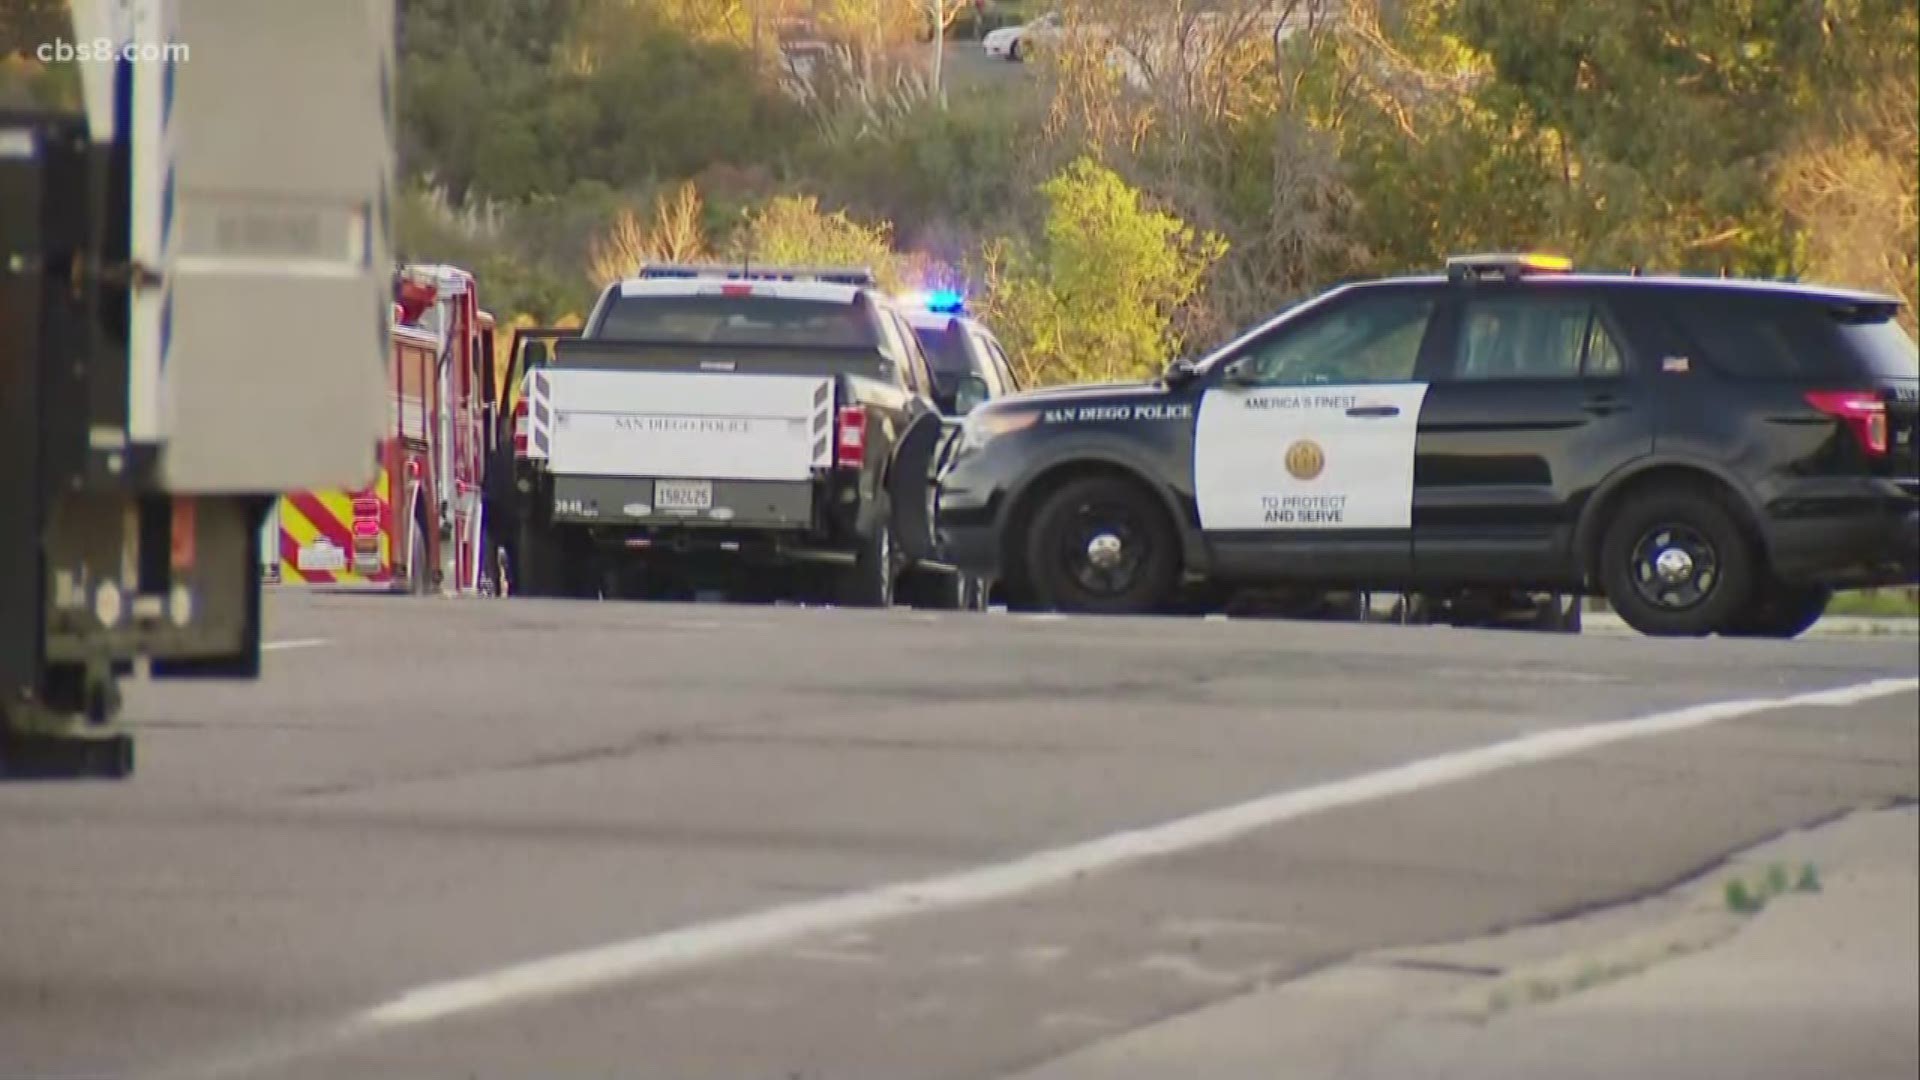 An officer-involved shooting on a trail in Otay Mesa has left one man wounded, according to the San Diego Police Department.